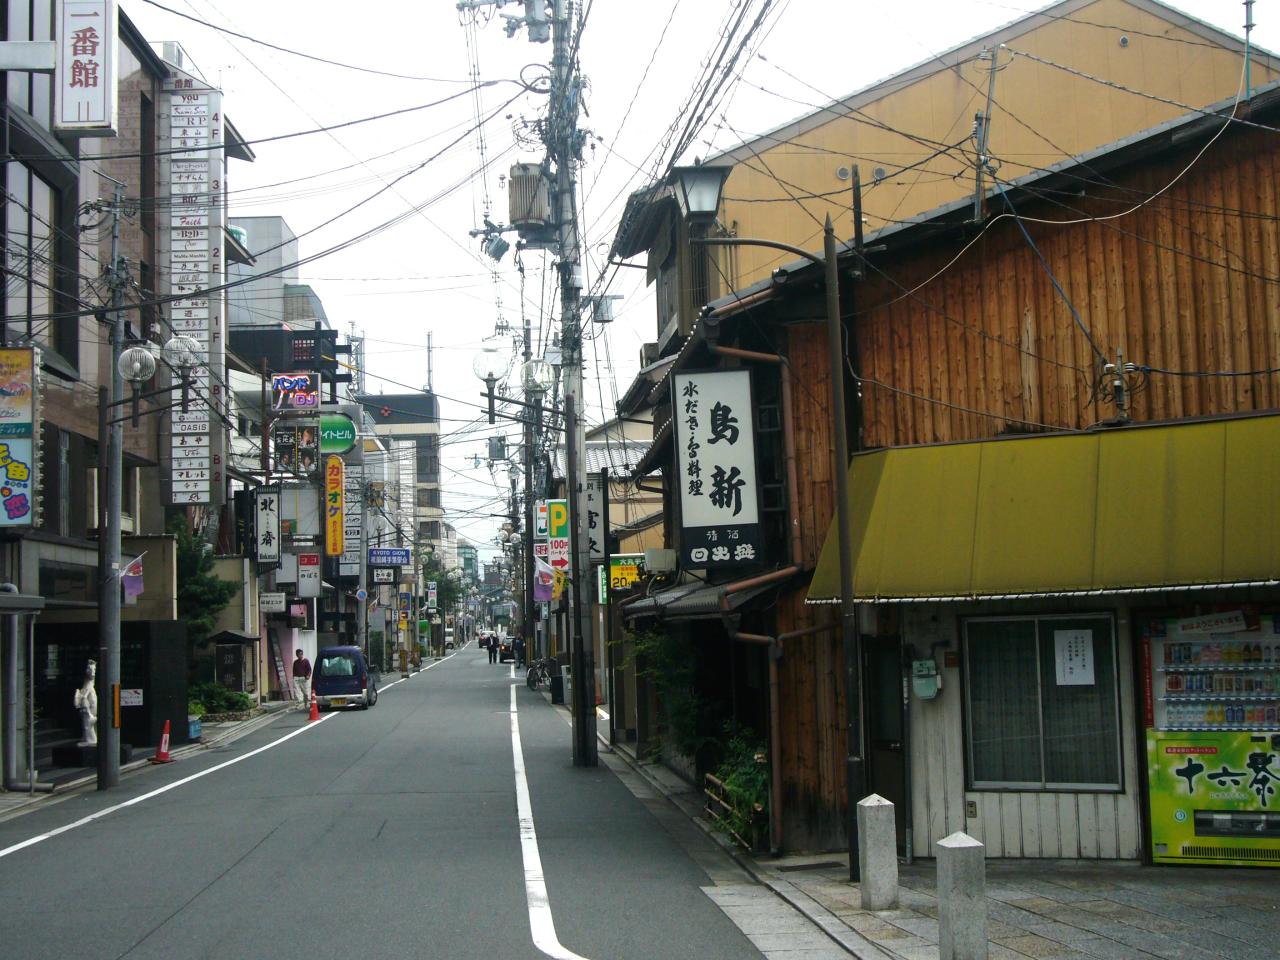 JPEG image - A typical road in the Gion district of Kyoto. ...